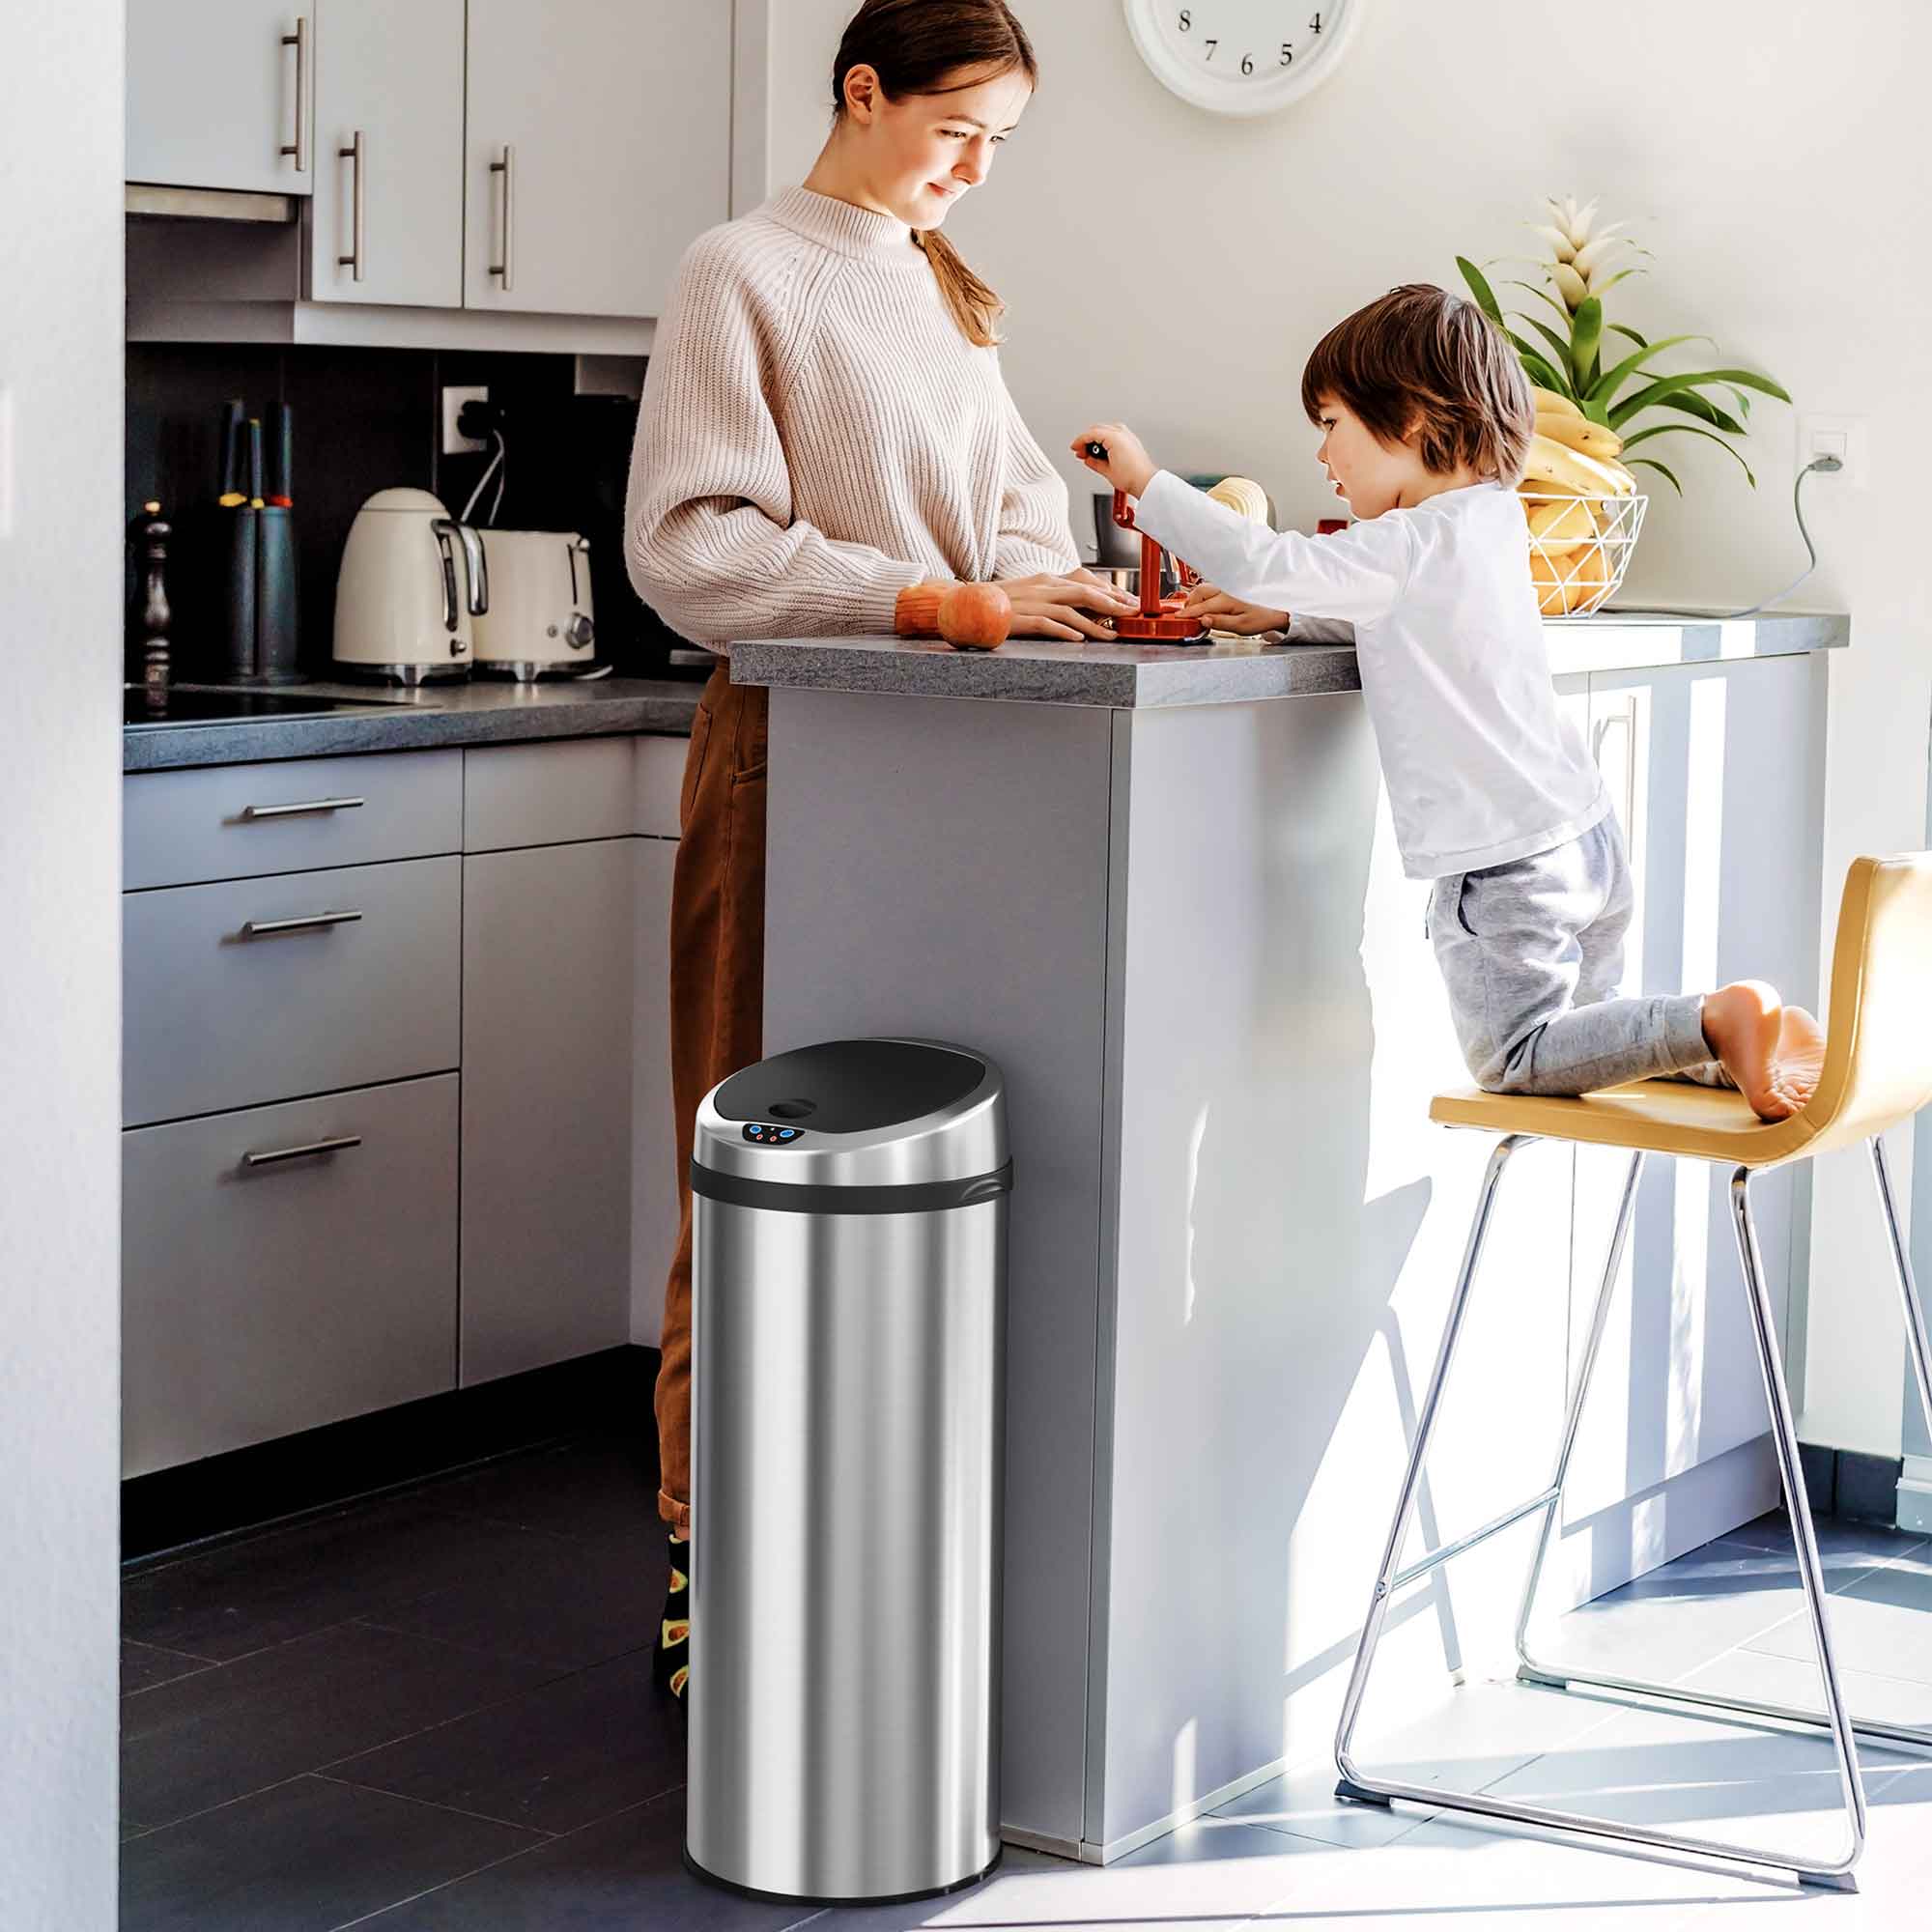 simplehuman 6L Stainless Steel Semi-Round Step Trash Can White